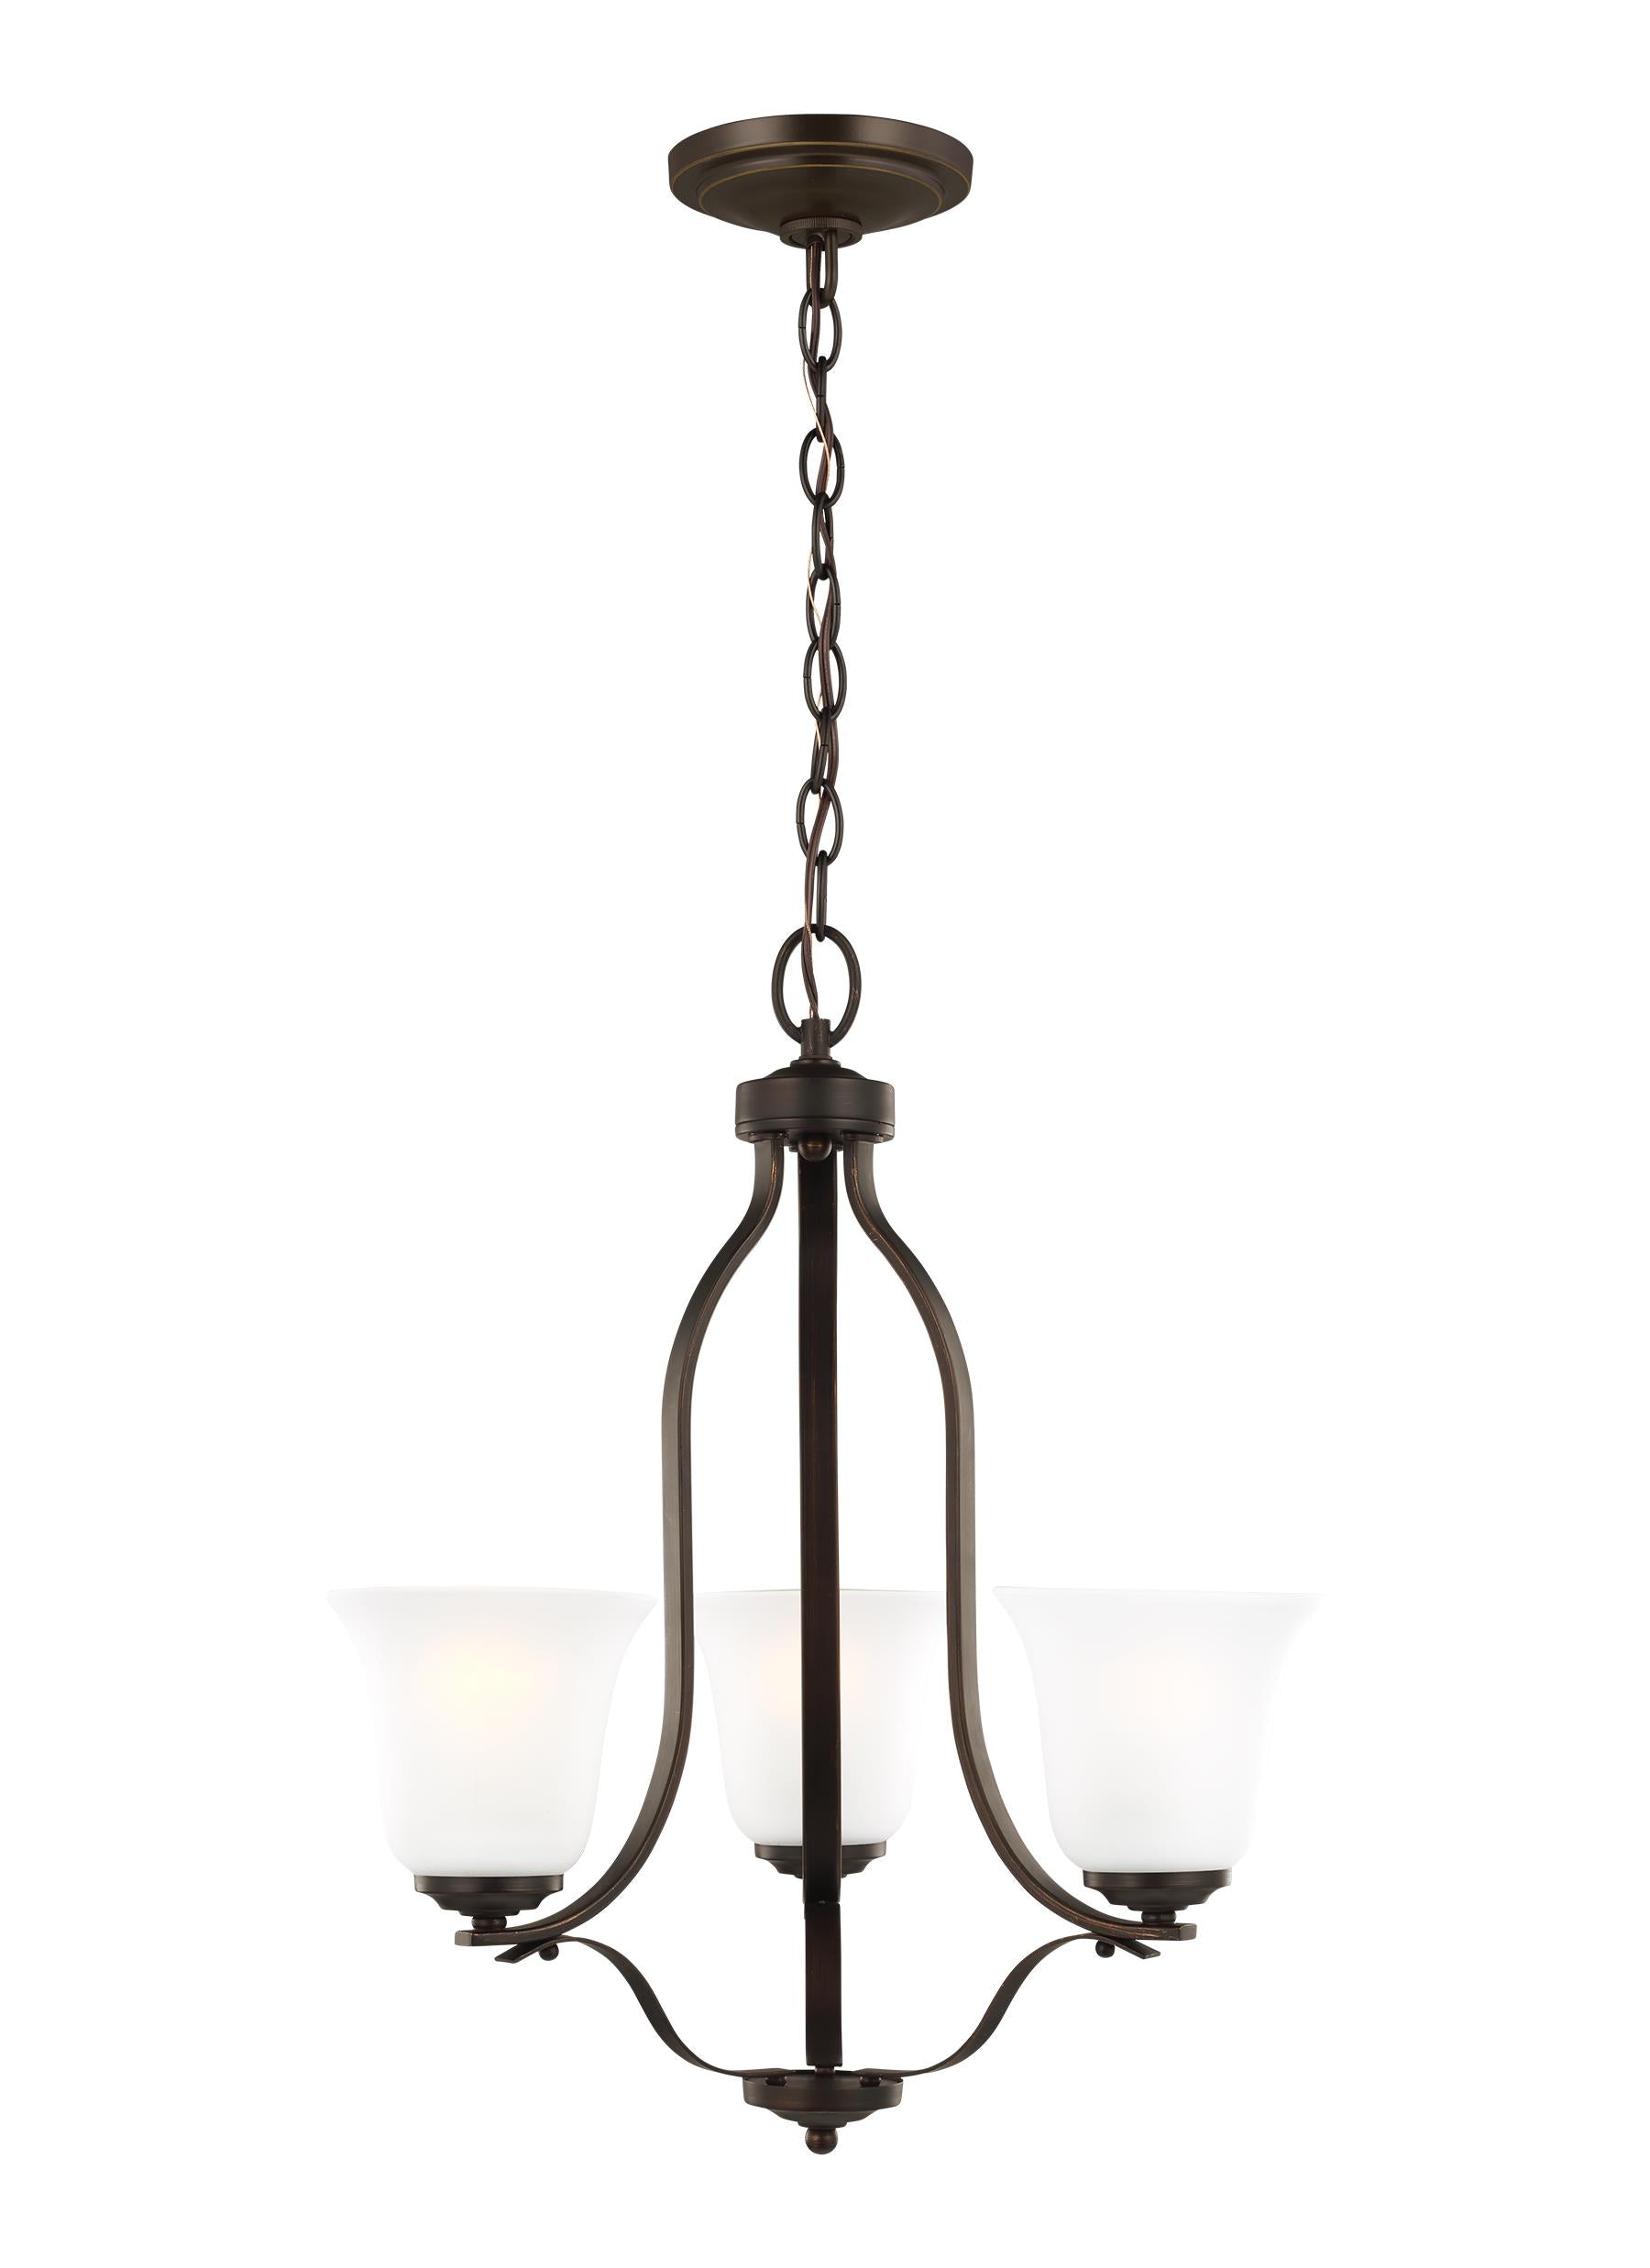 Emmons traditional 3-light indoor dimmable ceiling chandelier pendant light in bronze finish with satin etched glass shades